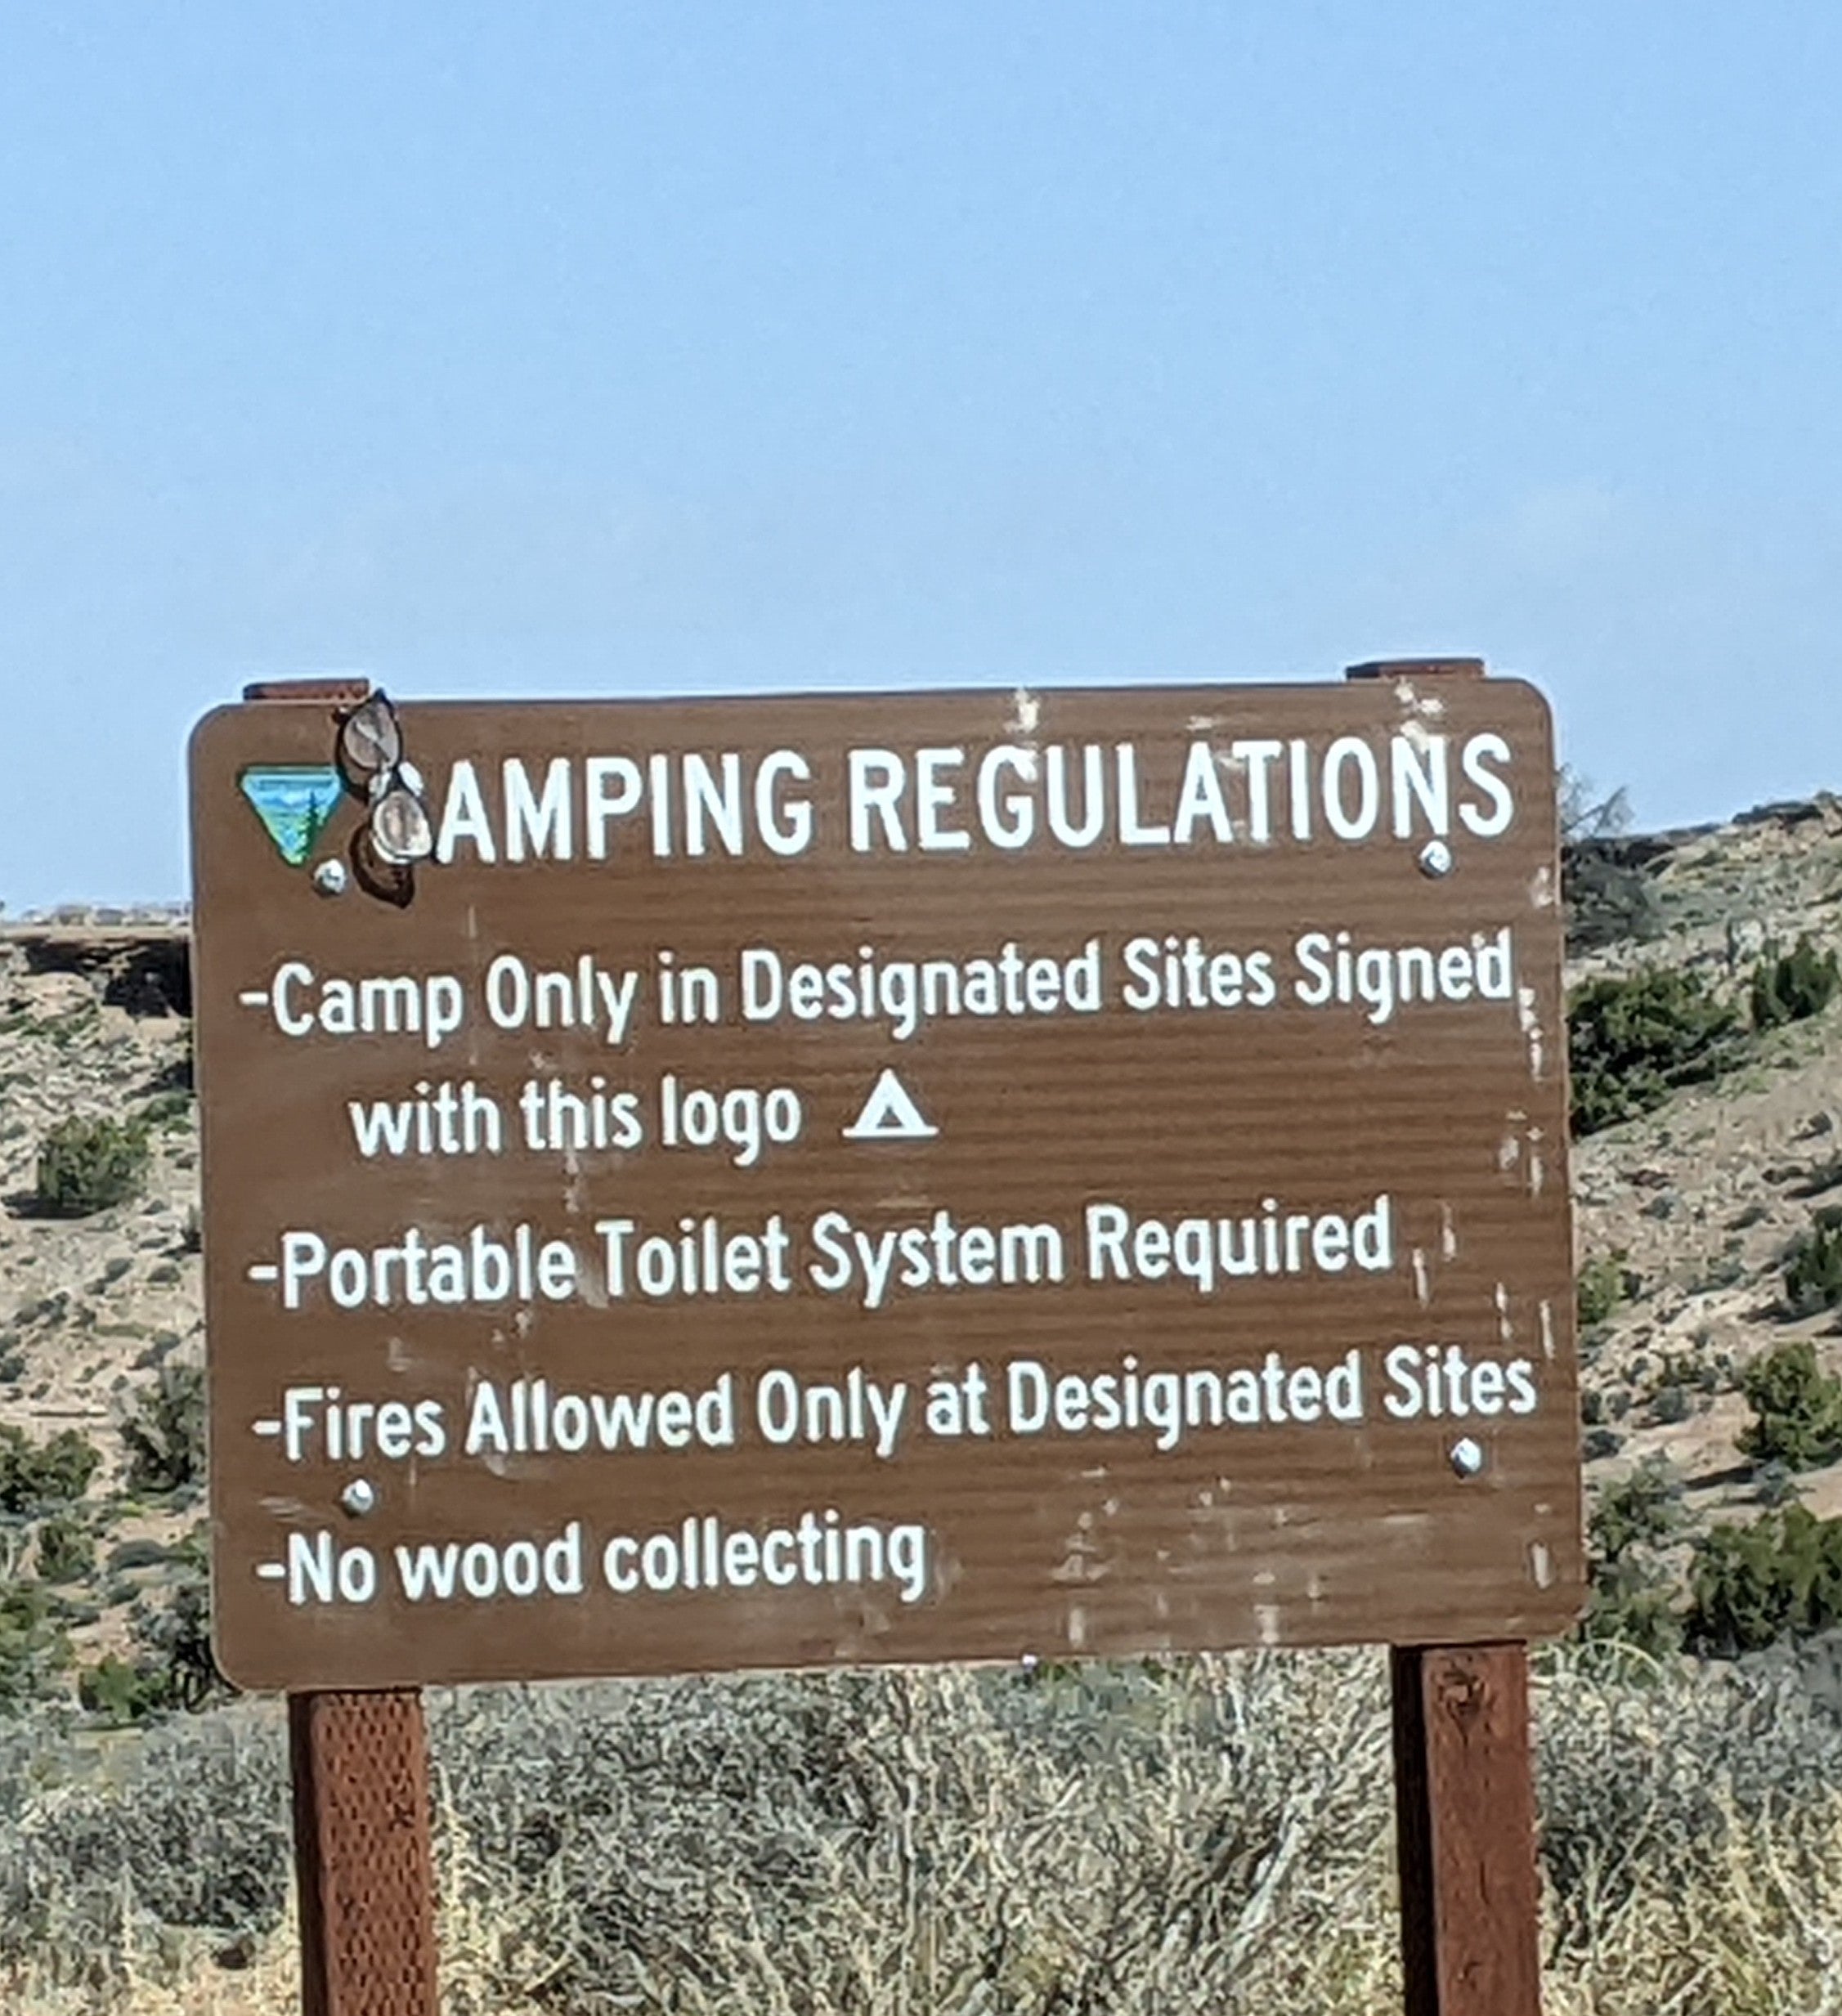 Camper submitted image from BLM Dubinky Road Dispersed Camping - 4